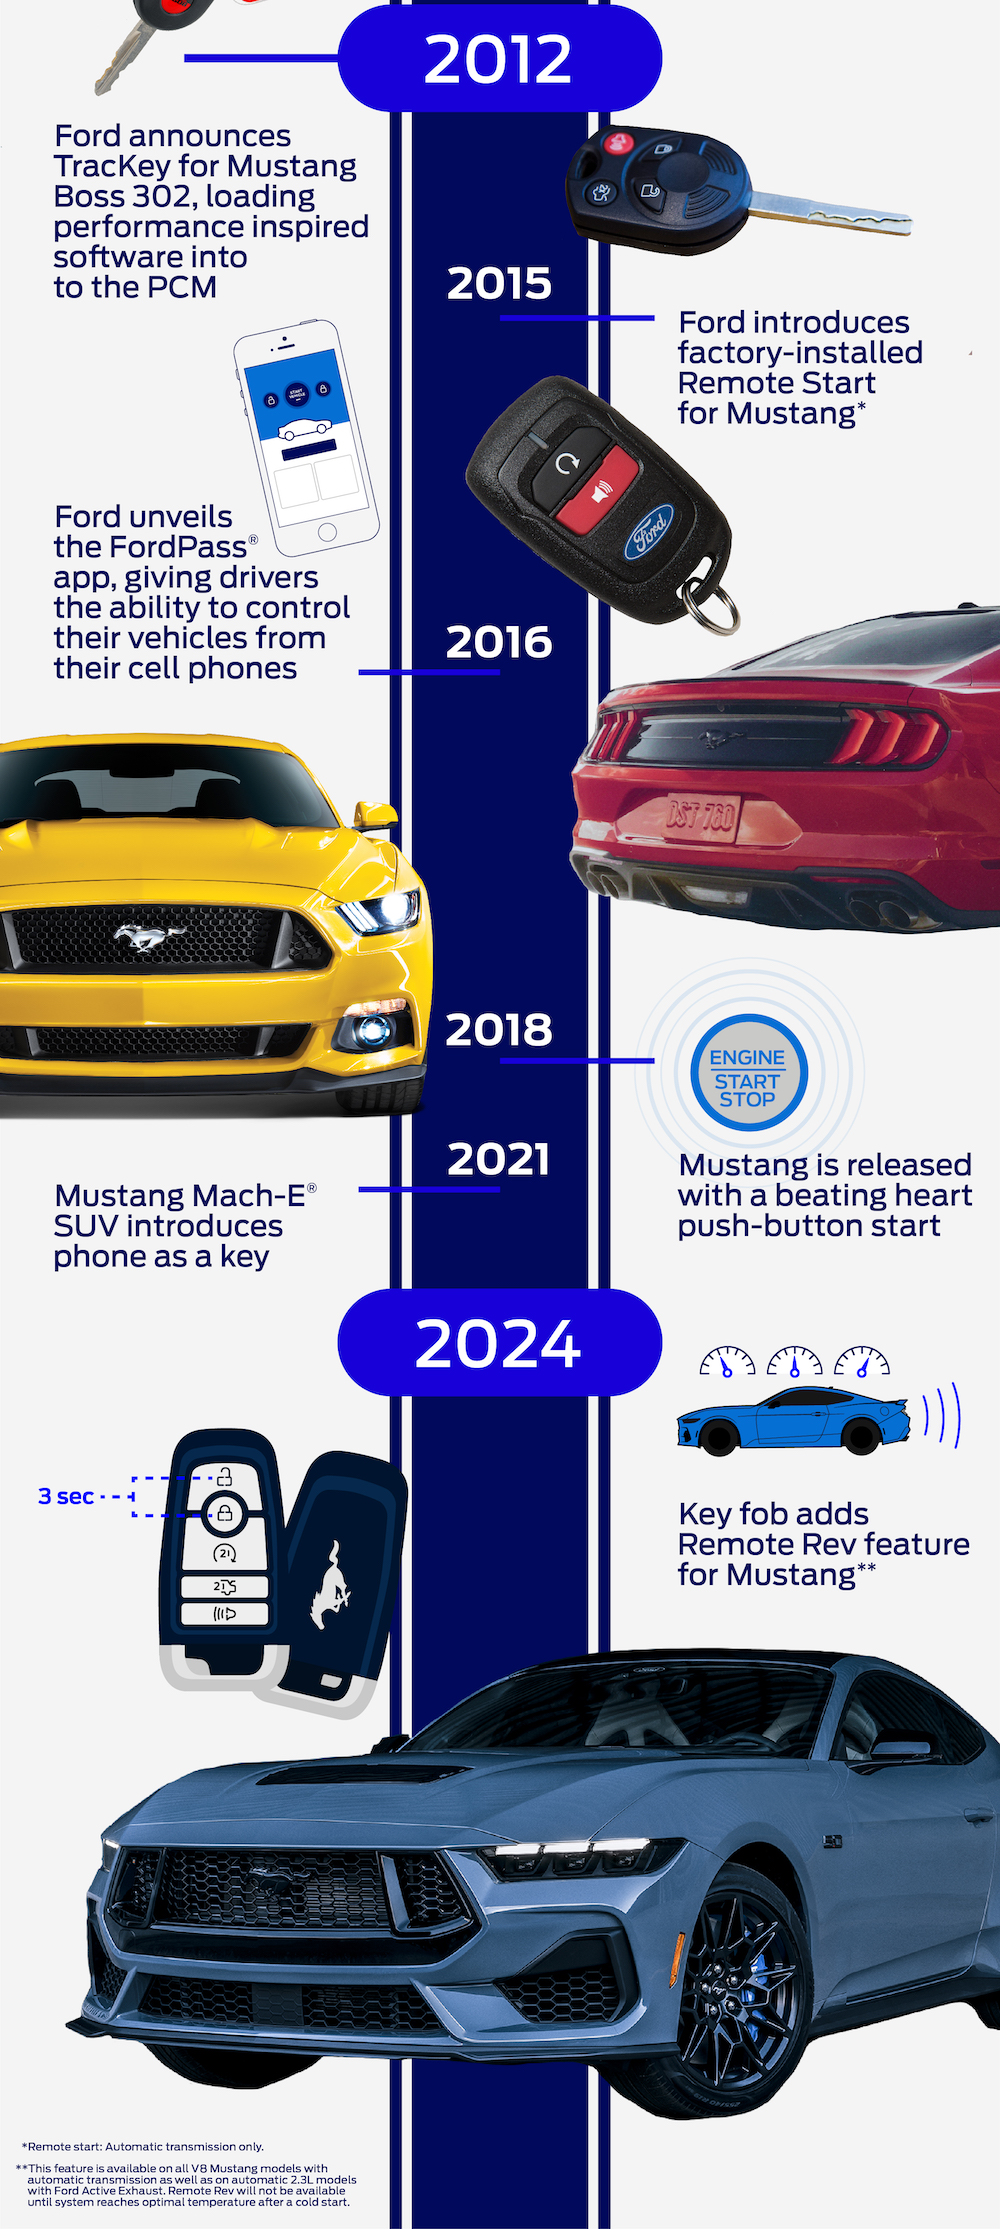 S650 Mustang How to use Remote Rev in 2024 Mustang S650 & a Key History Lesson Mustang Key Timeline copy